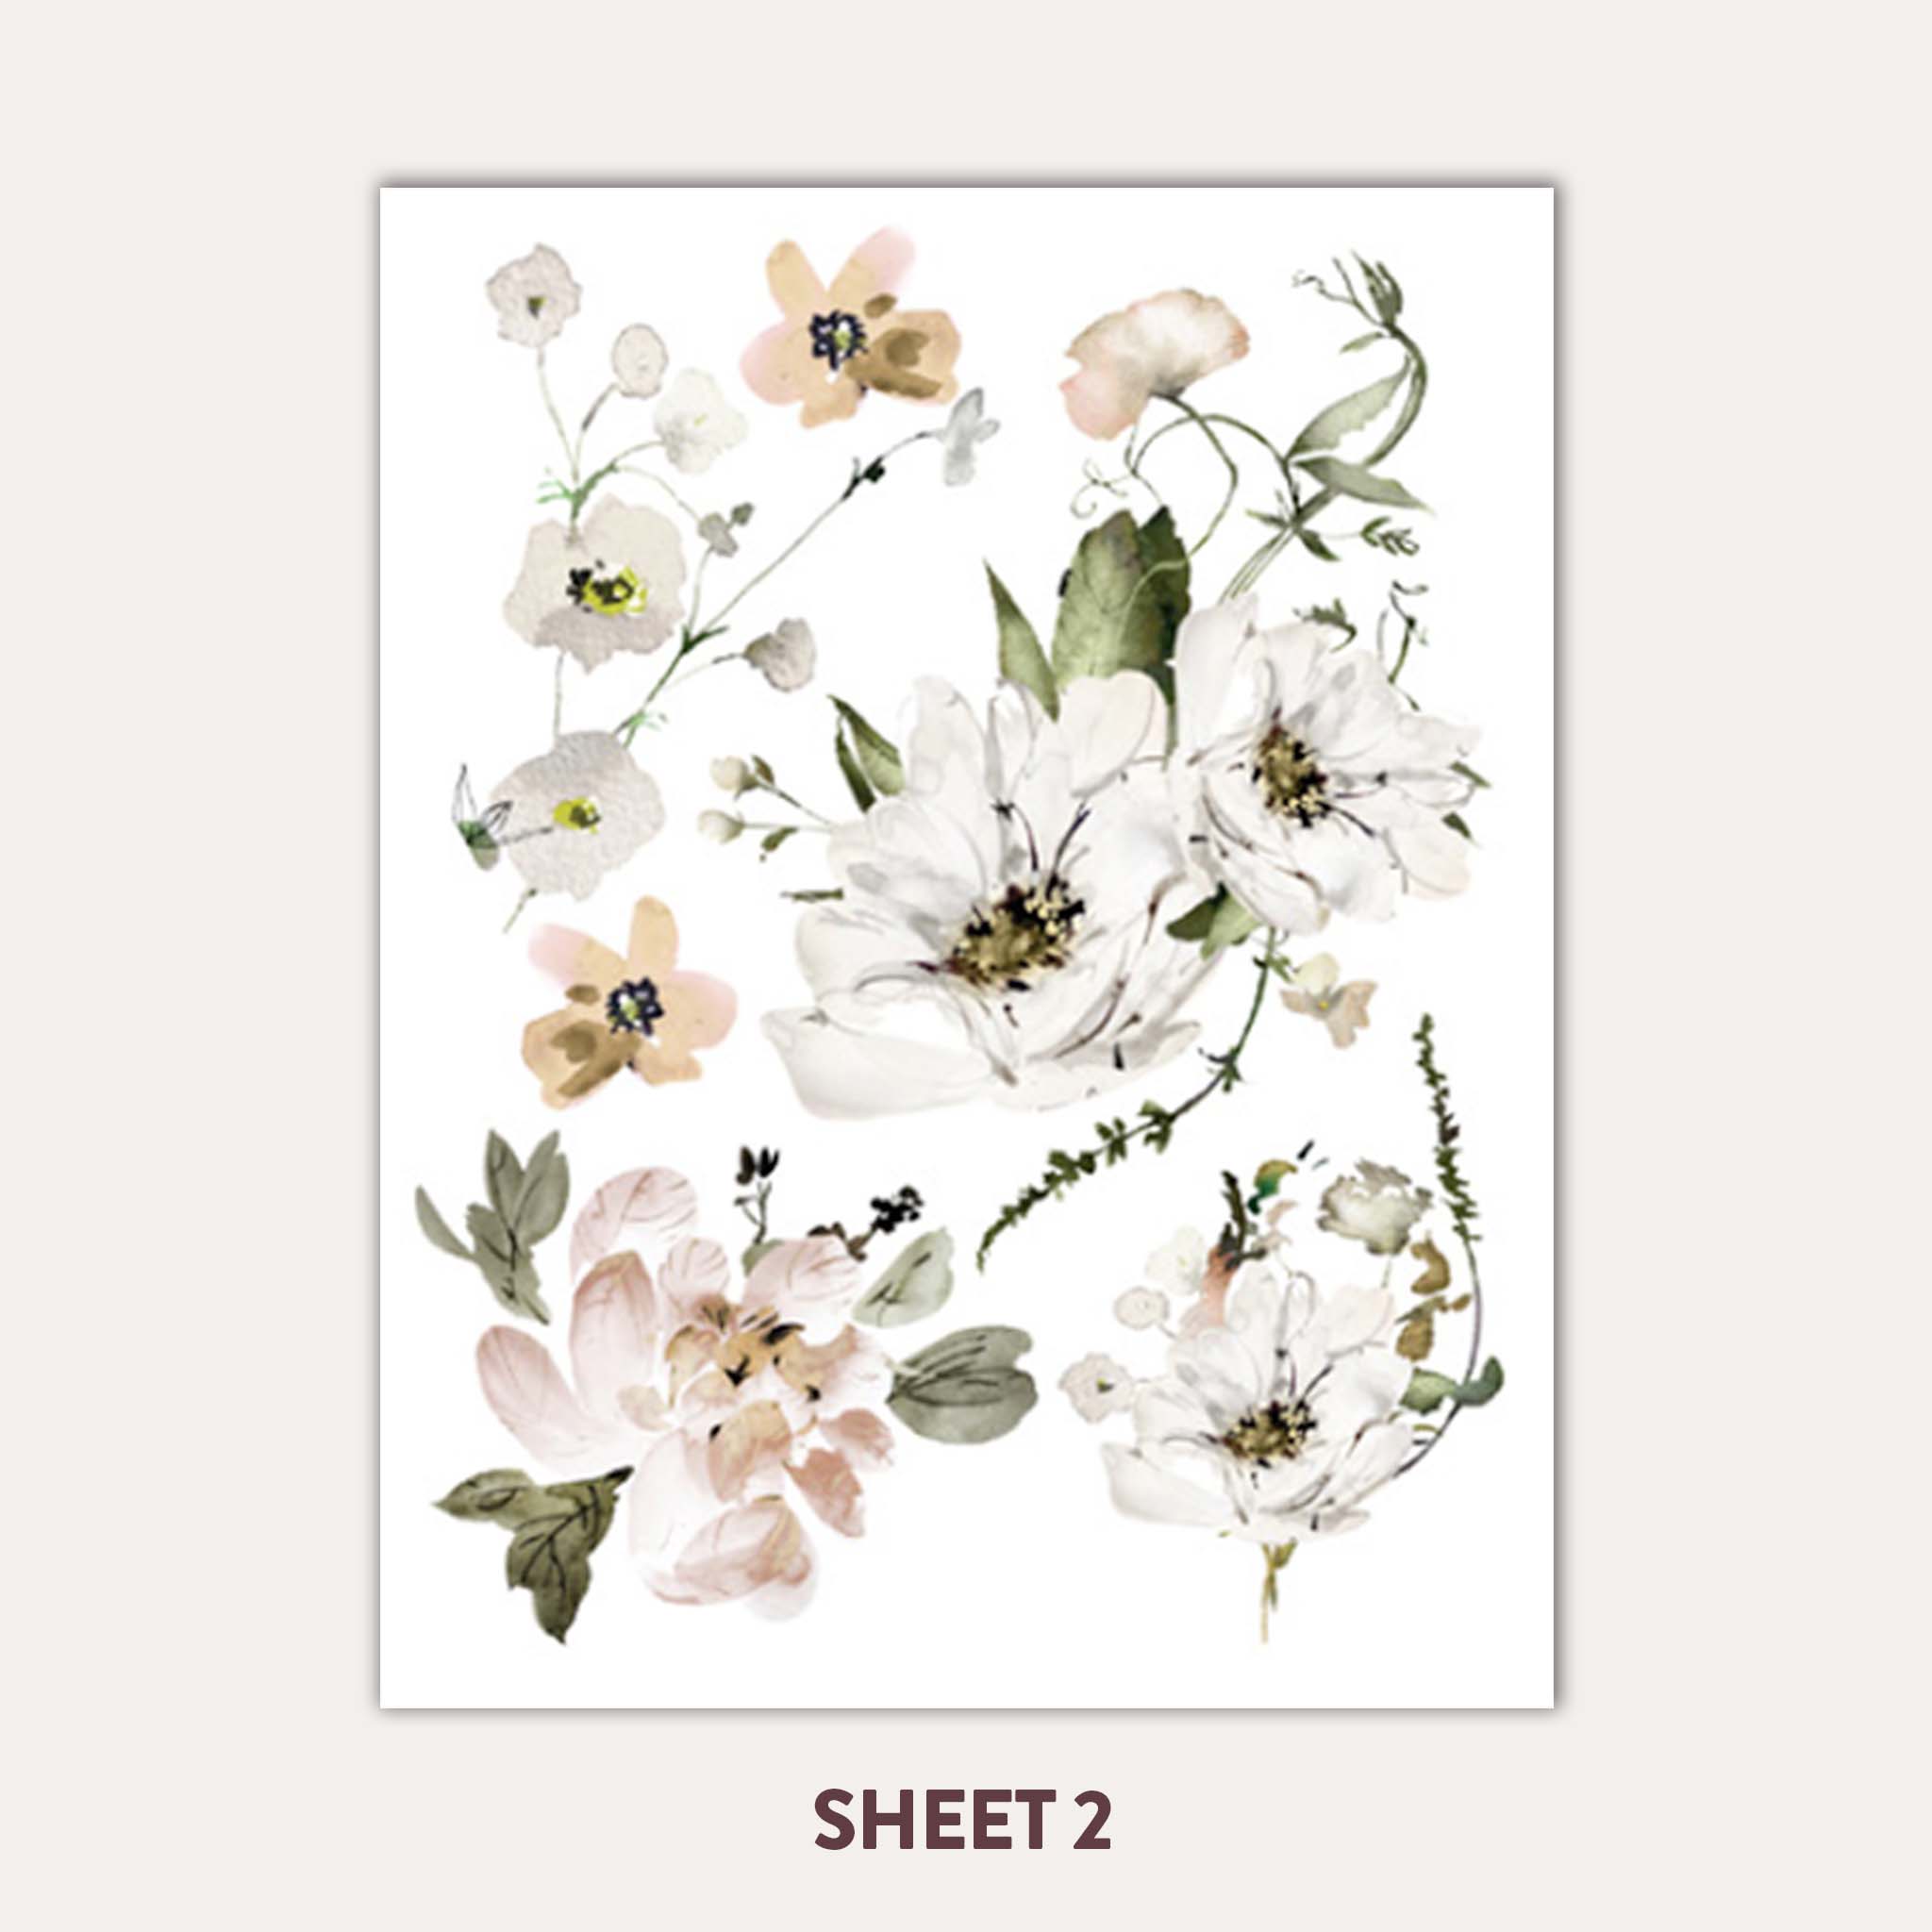 Sheet 2 of ReDesign with Prima's Pastels Artistry small transfer features scattered cream and blush florals.